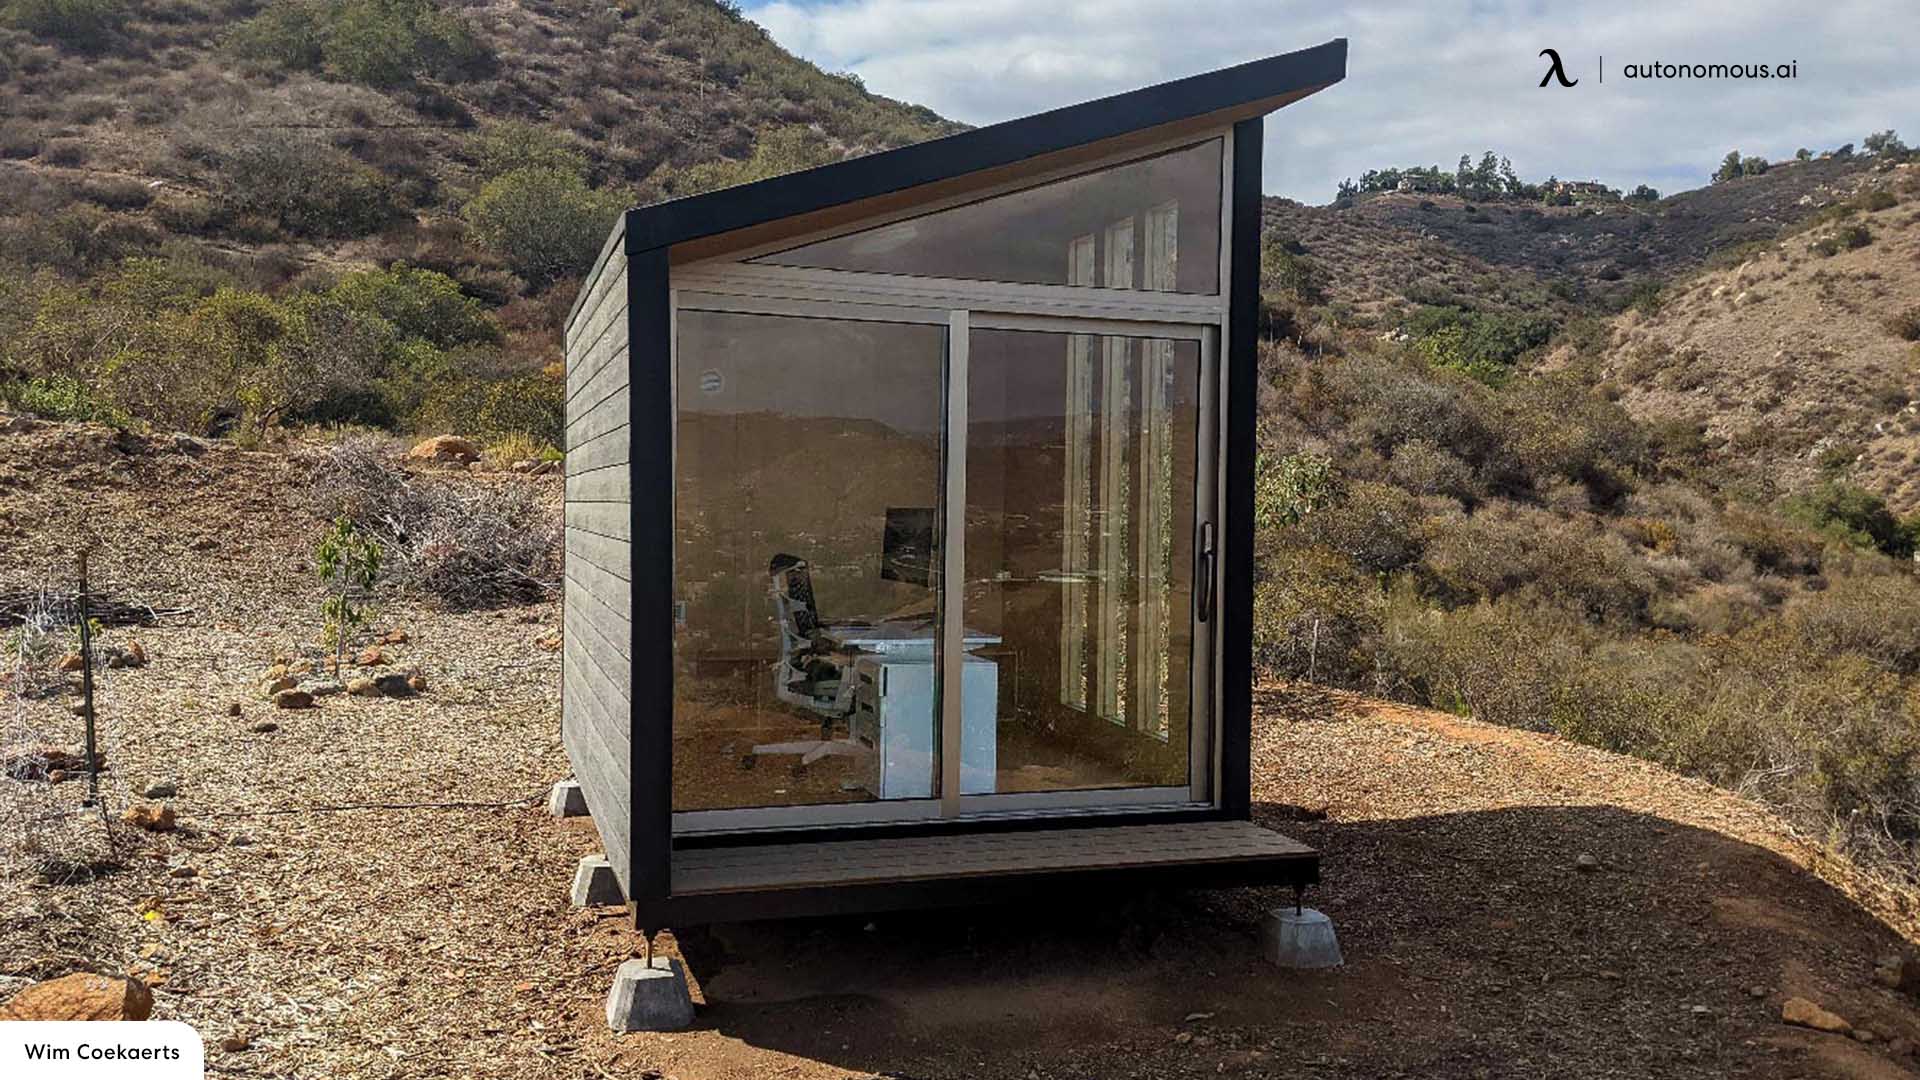 Why Would You Want an Outdoor Office Pod in California?